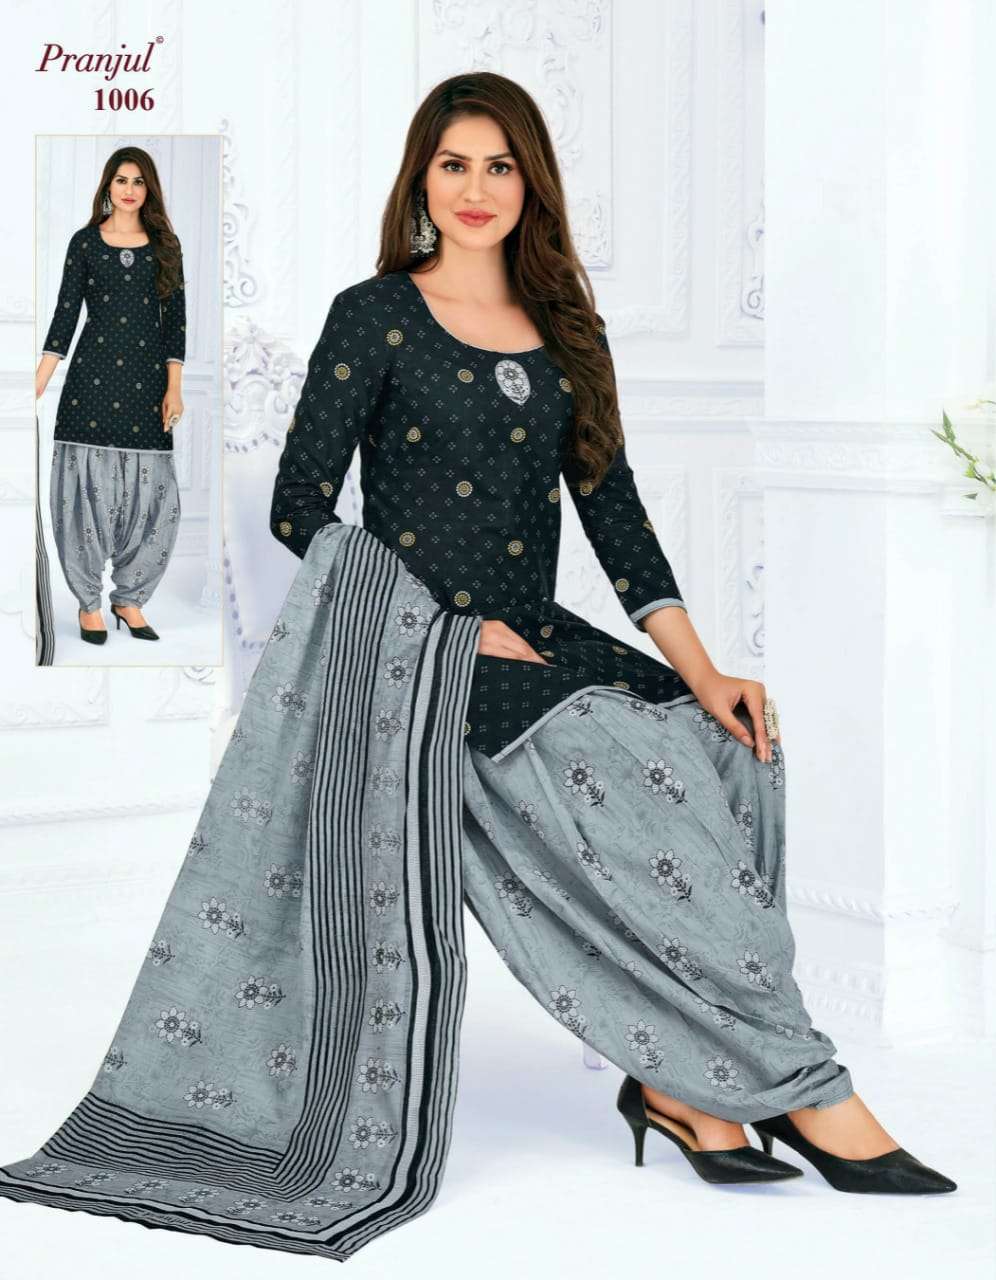 PRIYANKA VOL-10 NX BY PRANJUL BEAUTIFUL SUITS STYLISH FANCY COLORFUL CASUAL WEAR & ETHNIC WEAR PURE COTTON PRINTED DRESSES AT WHOLESALE PRICE